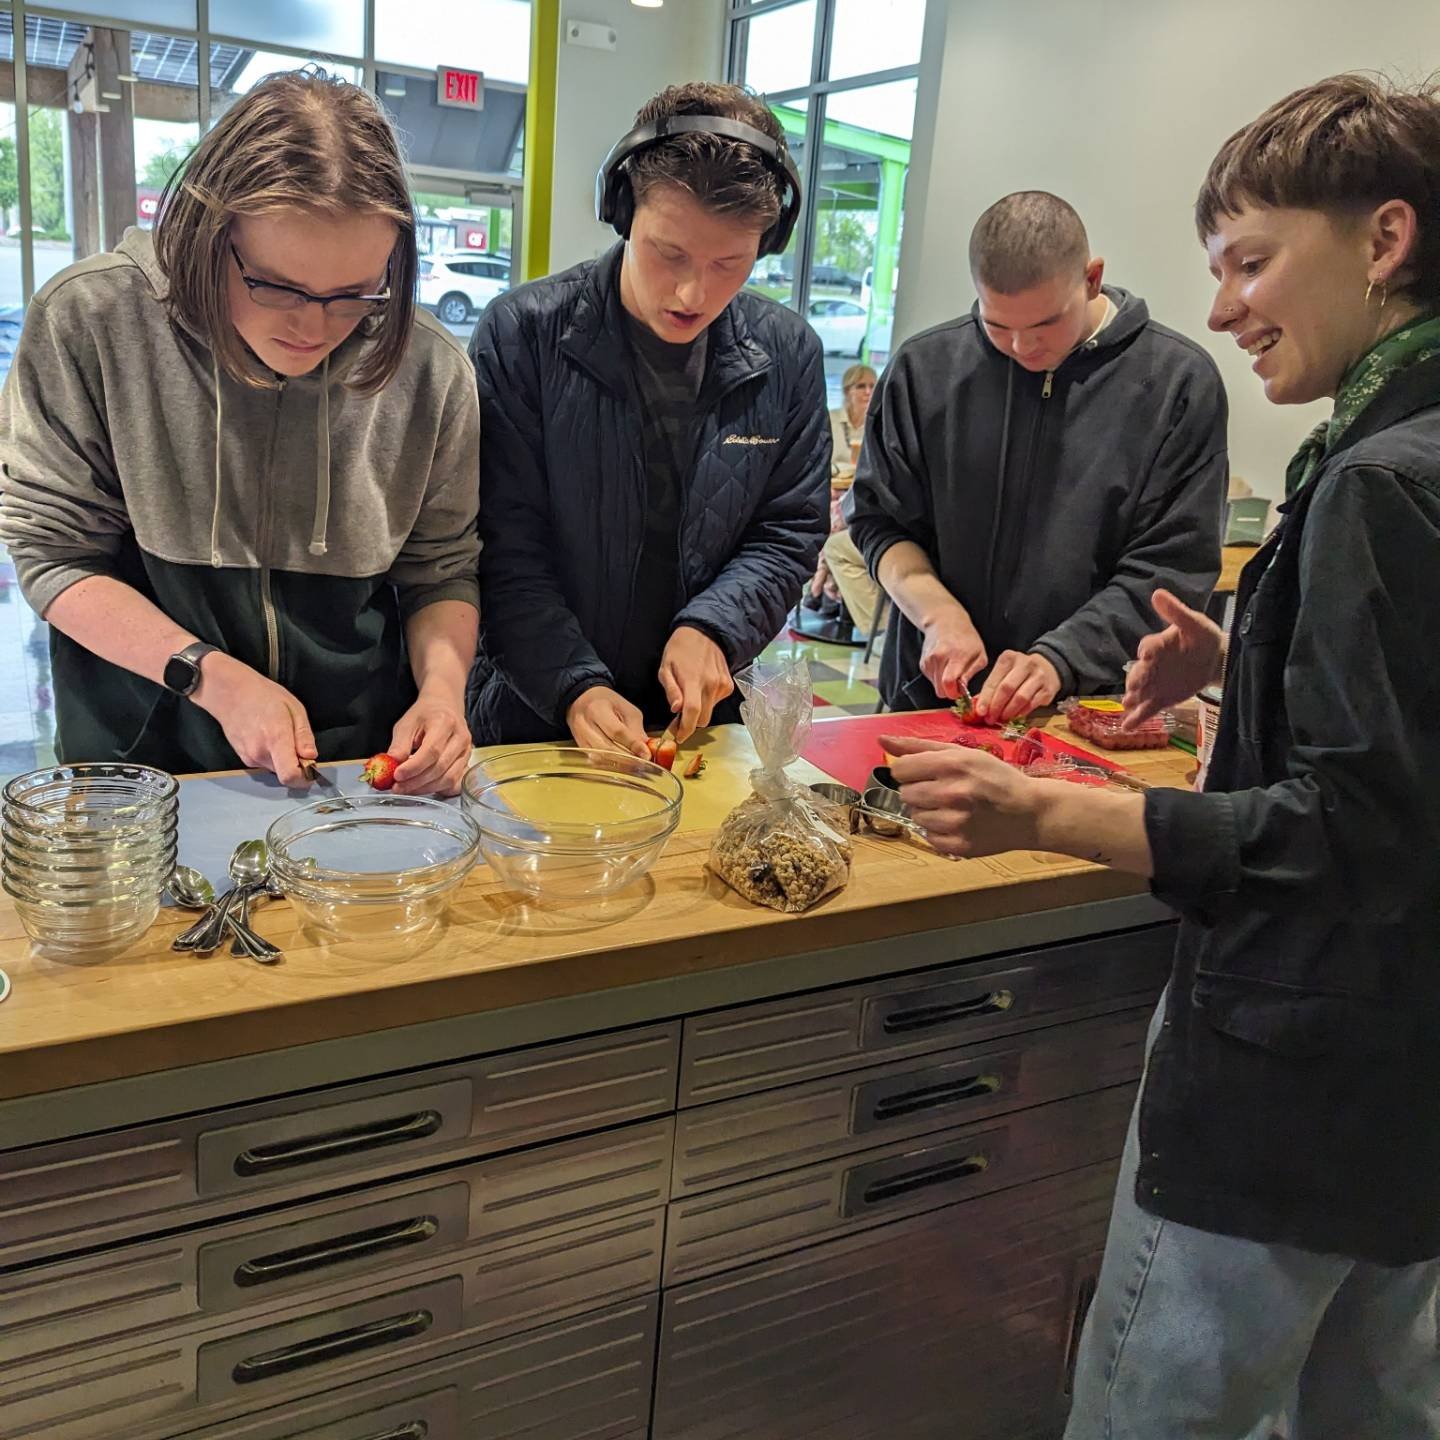 We were thrilled to host high schoolers from Free State and F.L. Schlagle at our stores this past week - and to partner with the teachers and leaders who serve our communities. 

Is your organization or classroom interested in a co-op tour or demonst